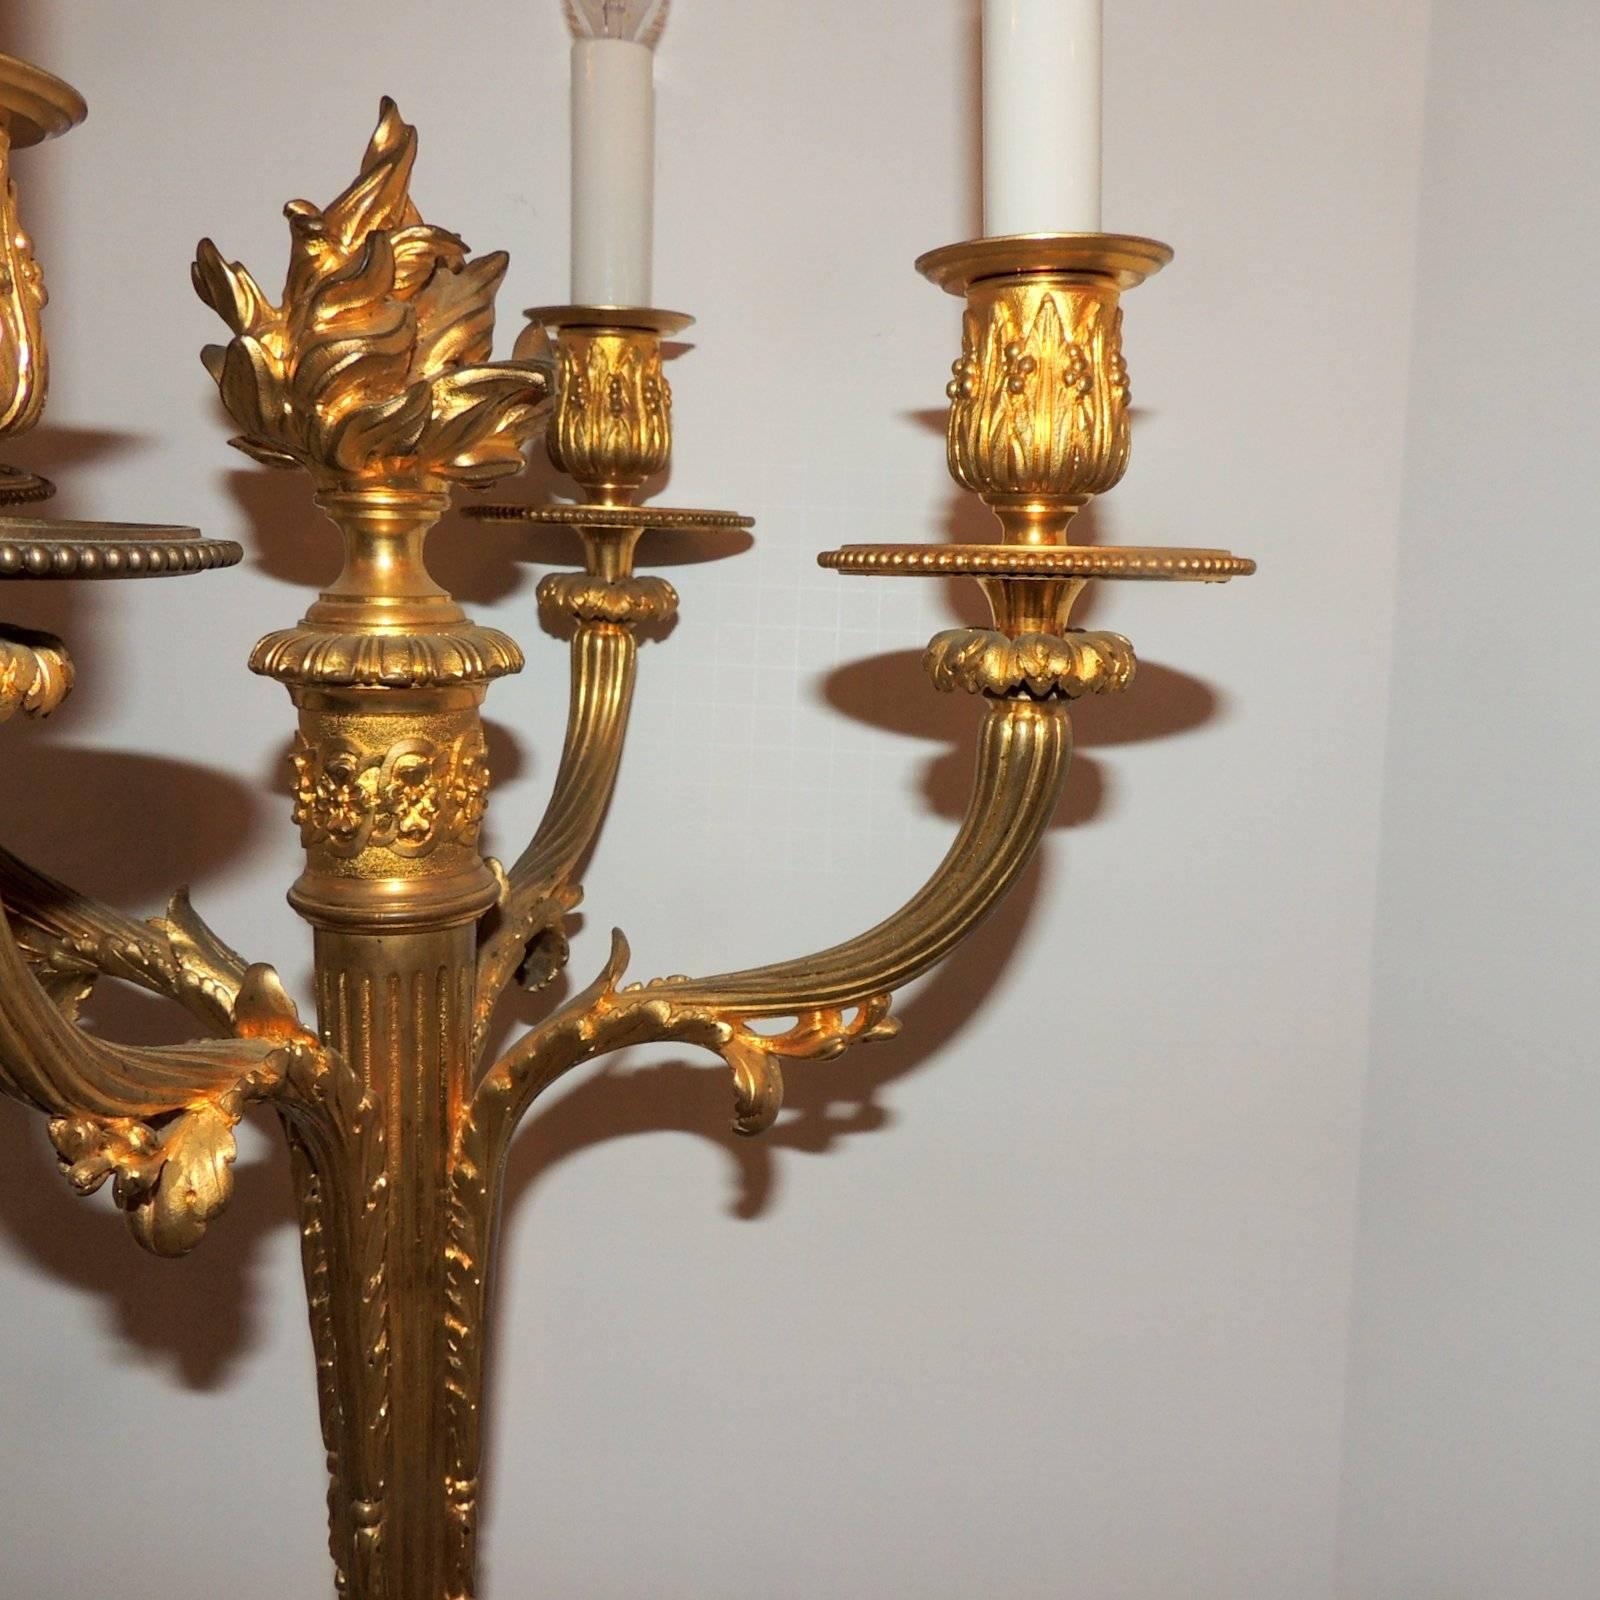 Wonderful Pair French Neoclassical Dore Bronze Regency Four-Arm Candelabra Lamps For Sale 2